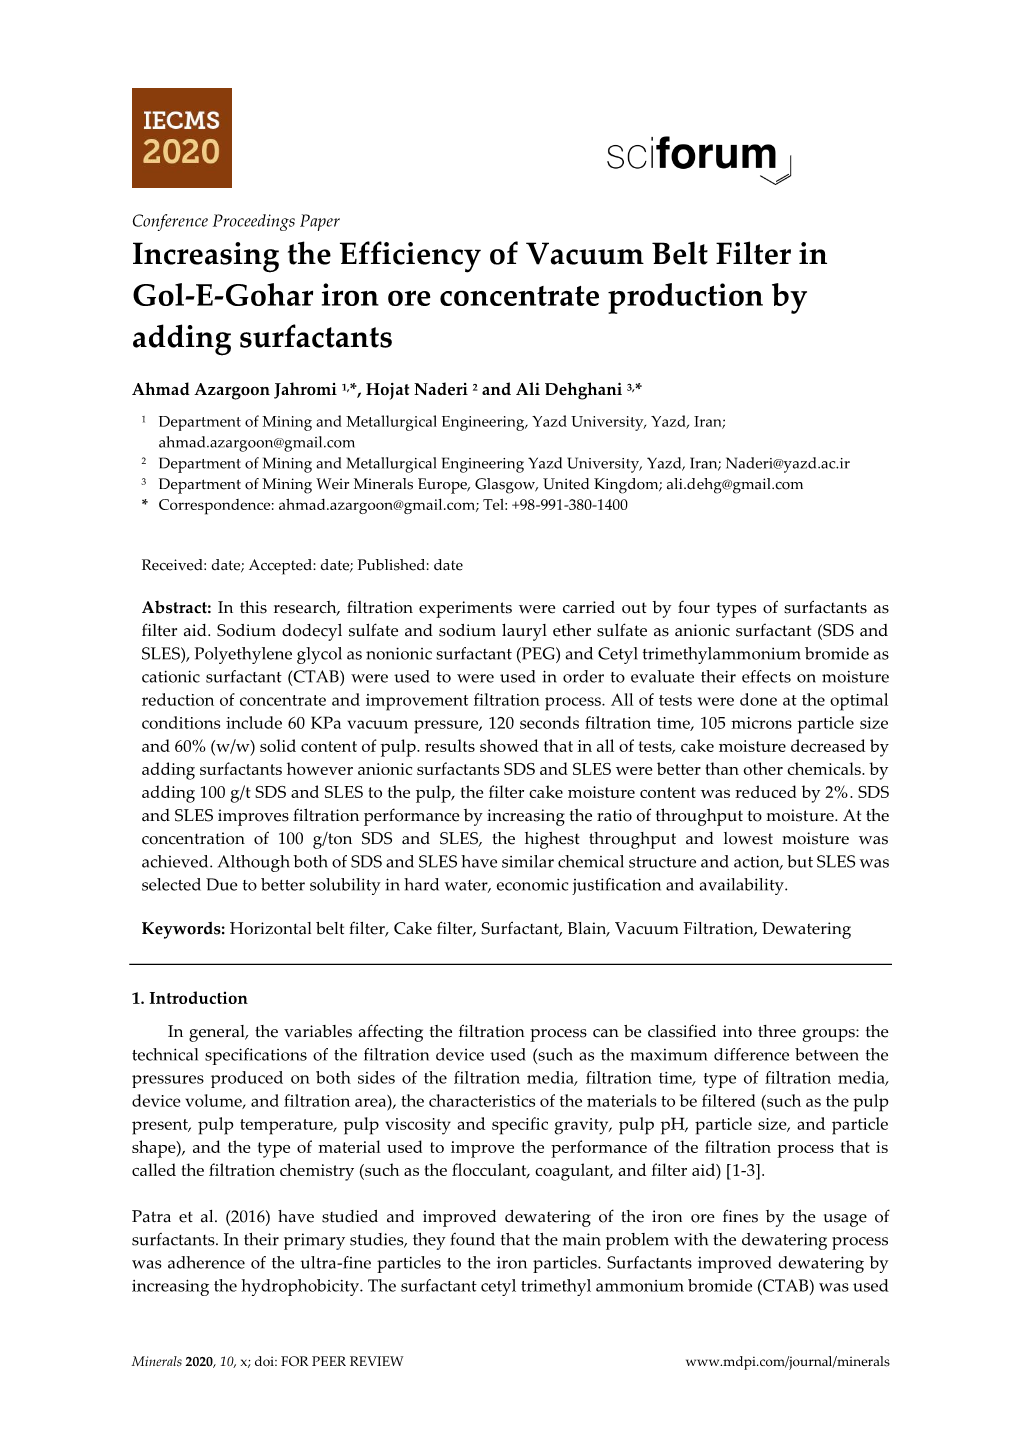 Increasing the Efficiency of Vacuum Belt Filter in Gol-E-Gohar Iron Ore Concentrate Production by Adding Surfactants